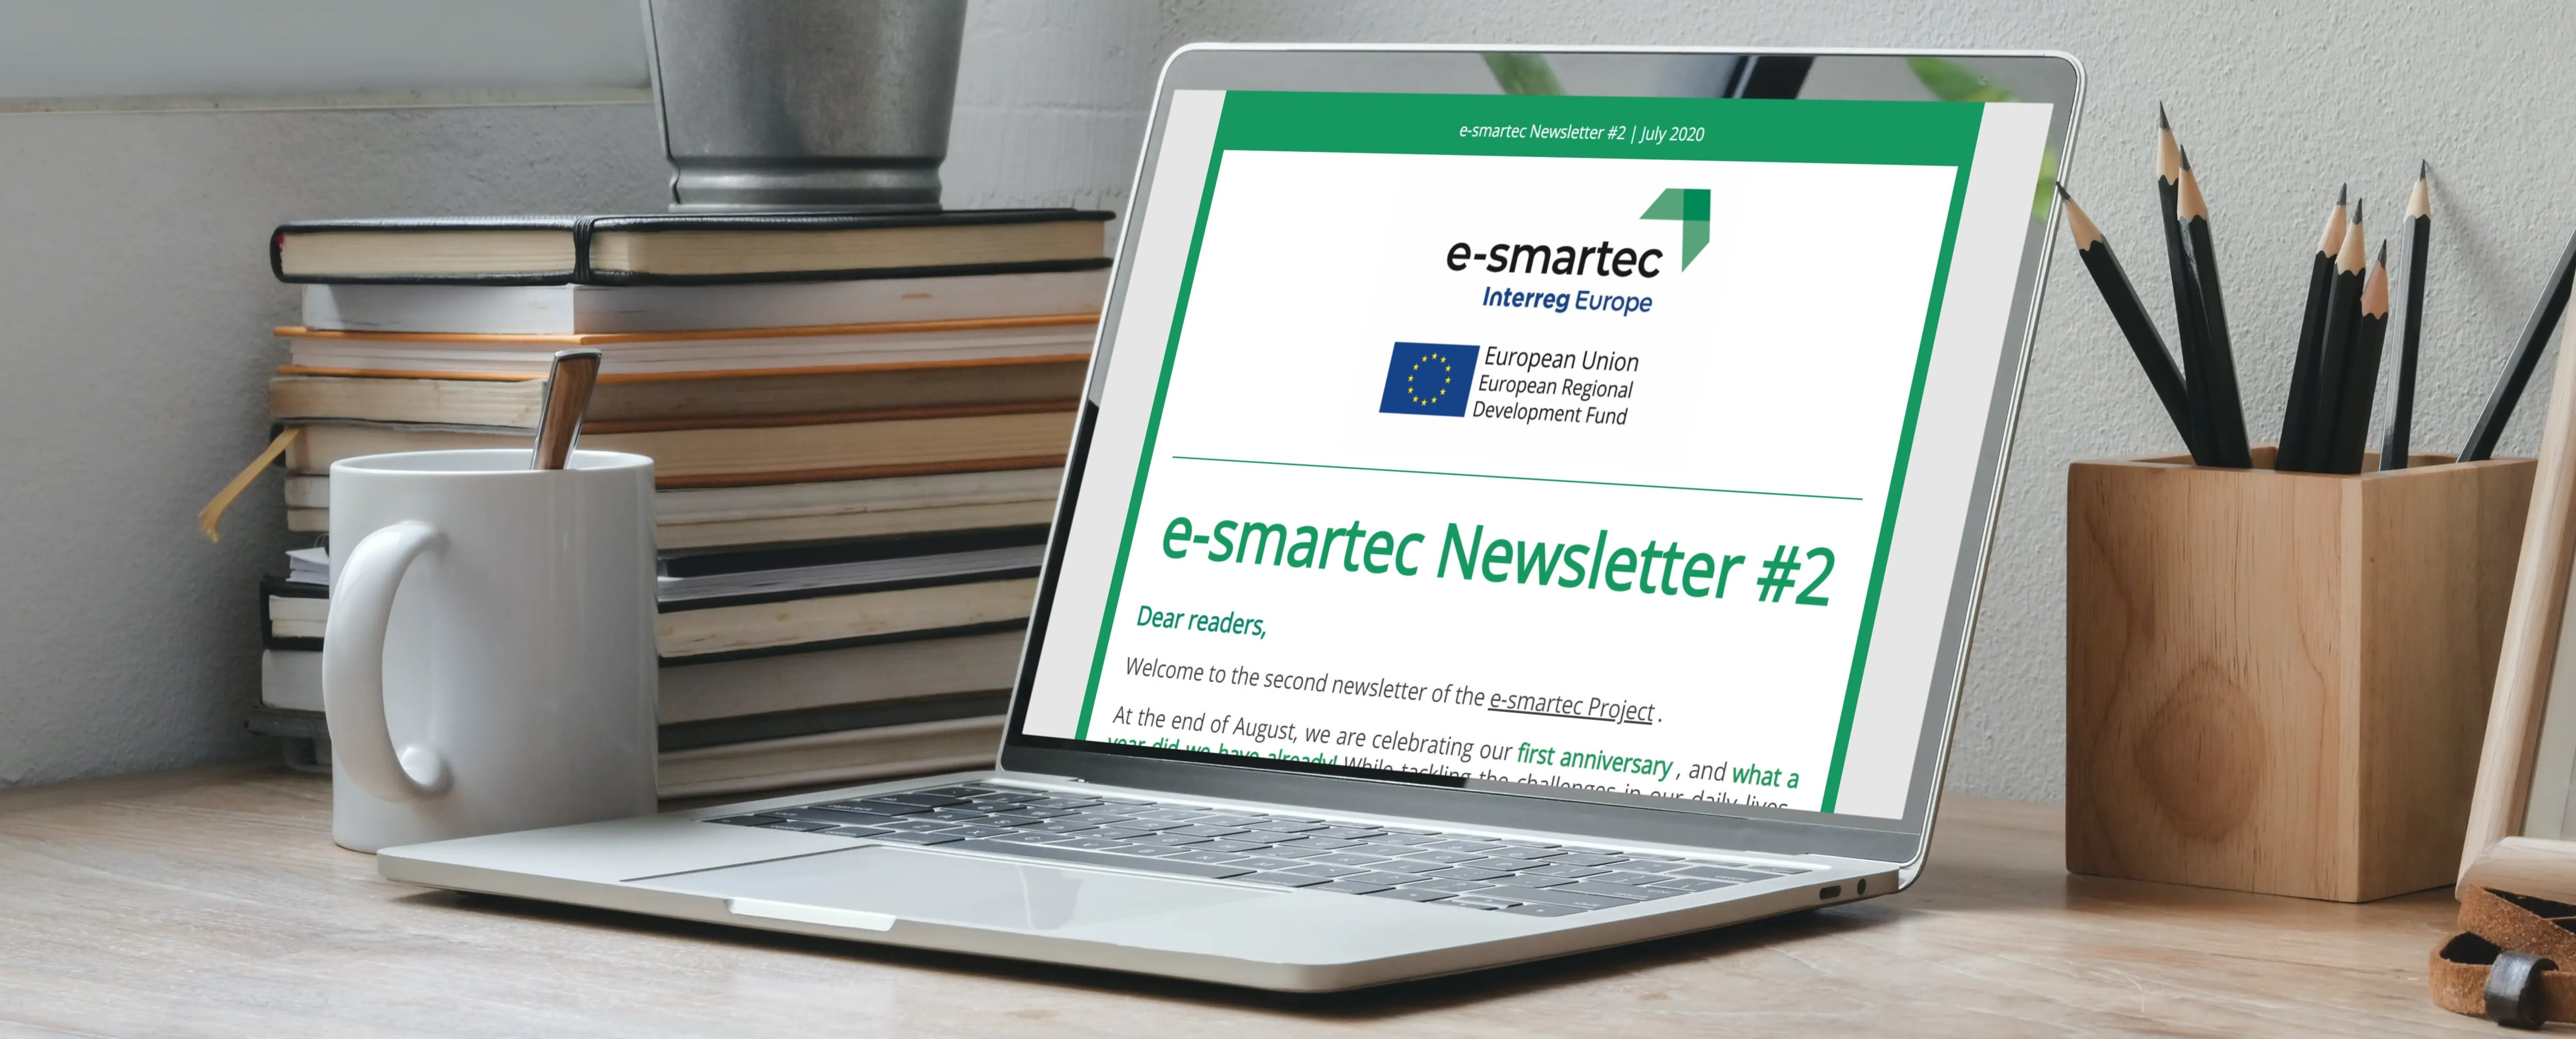 The 2nd e-smartec Newsletter is FINALLY here!